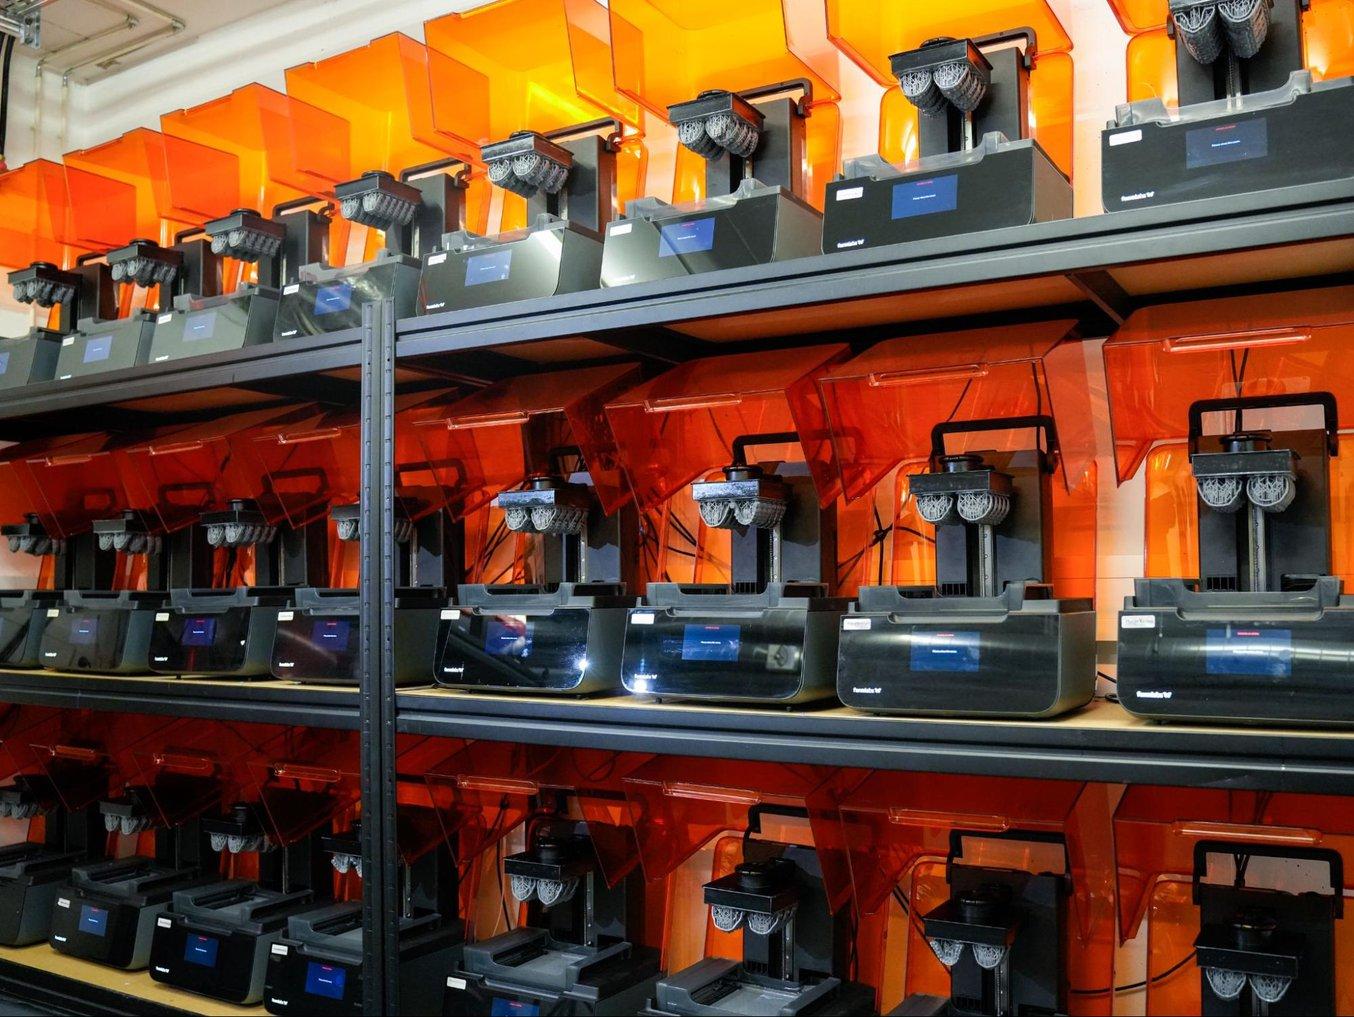 A large fleet of compact printers